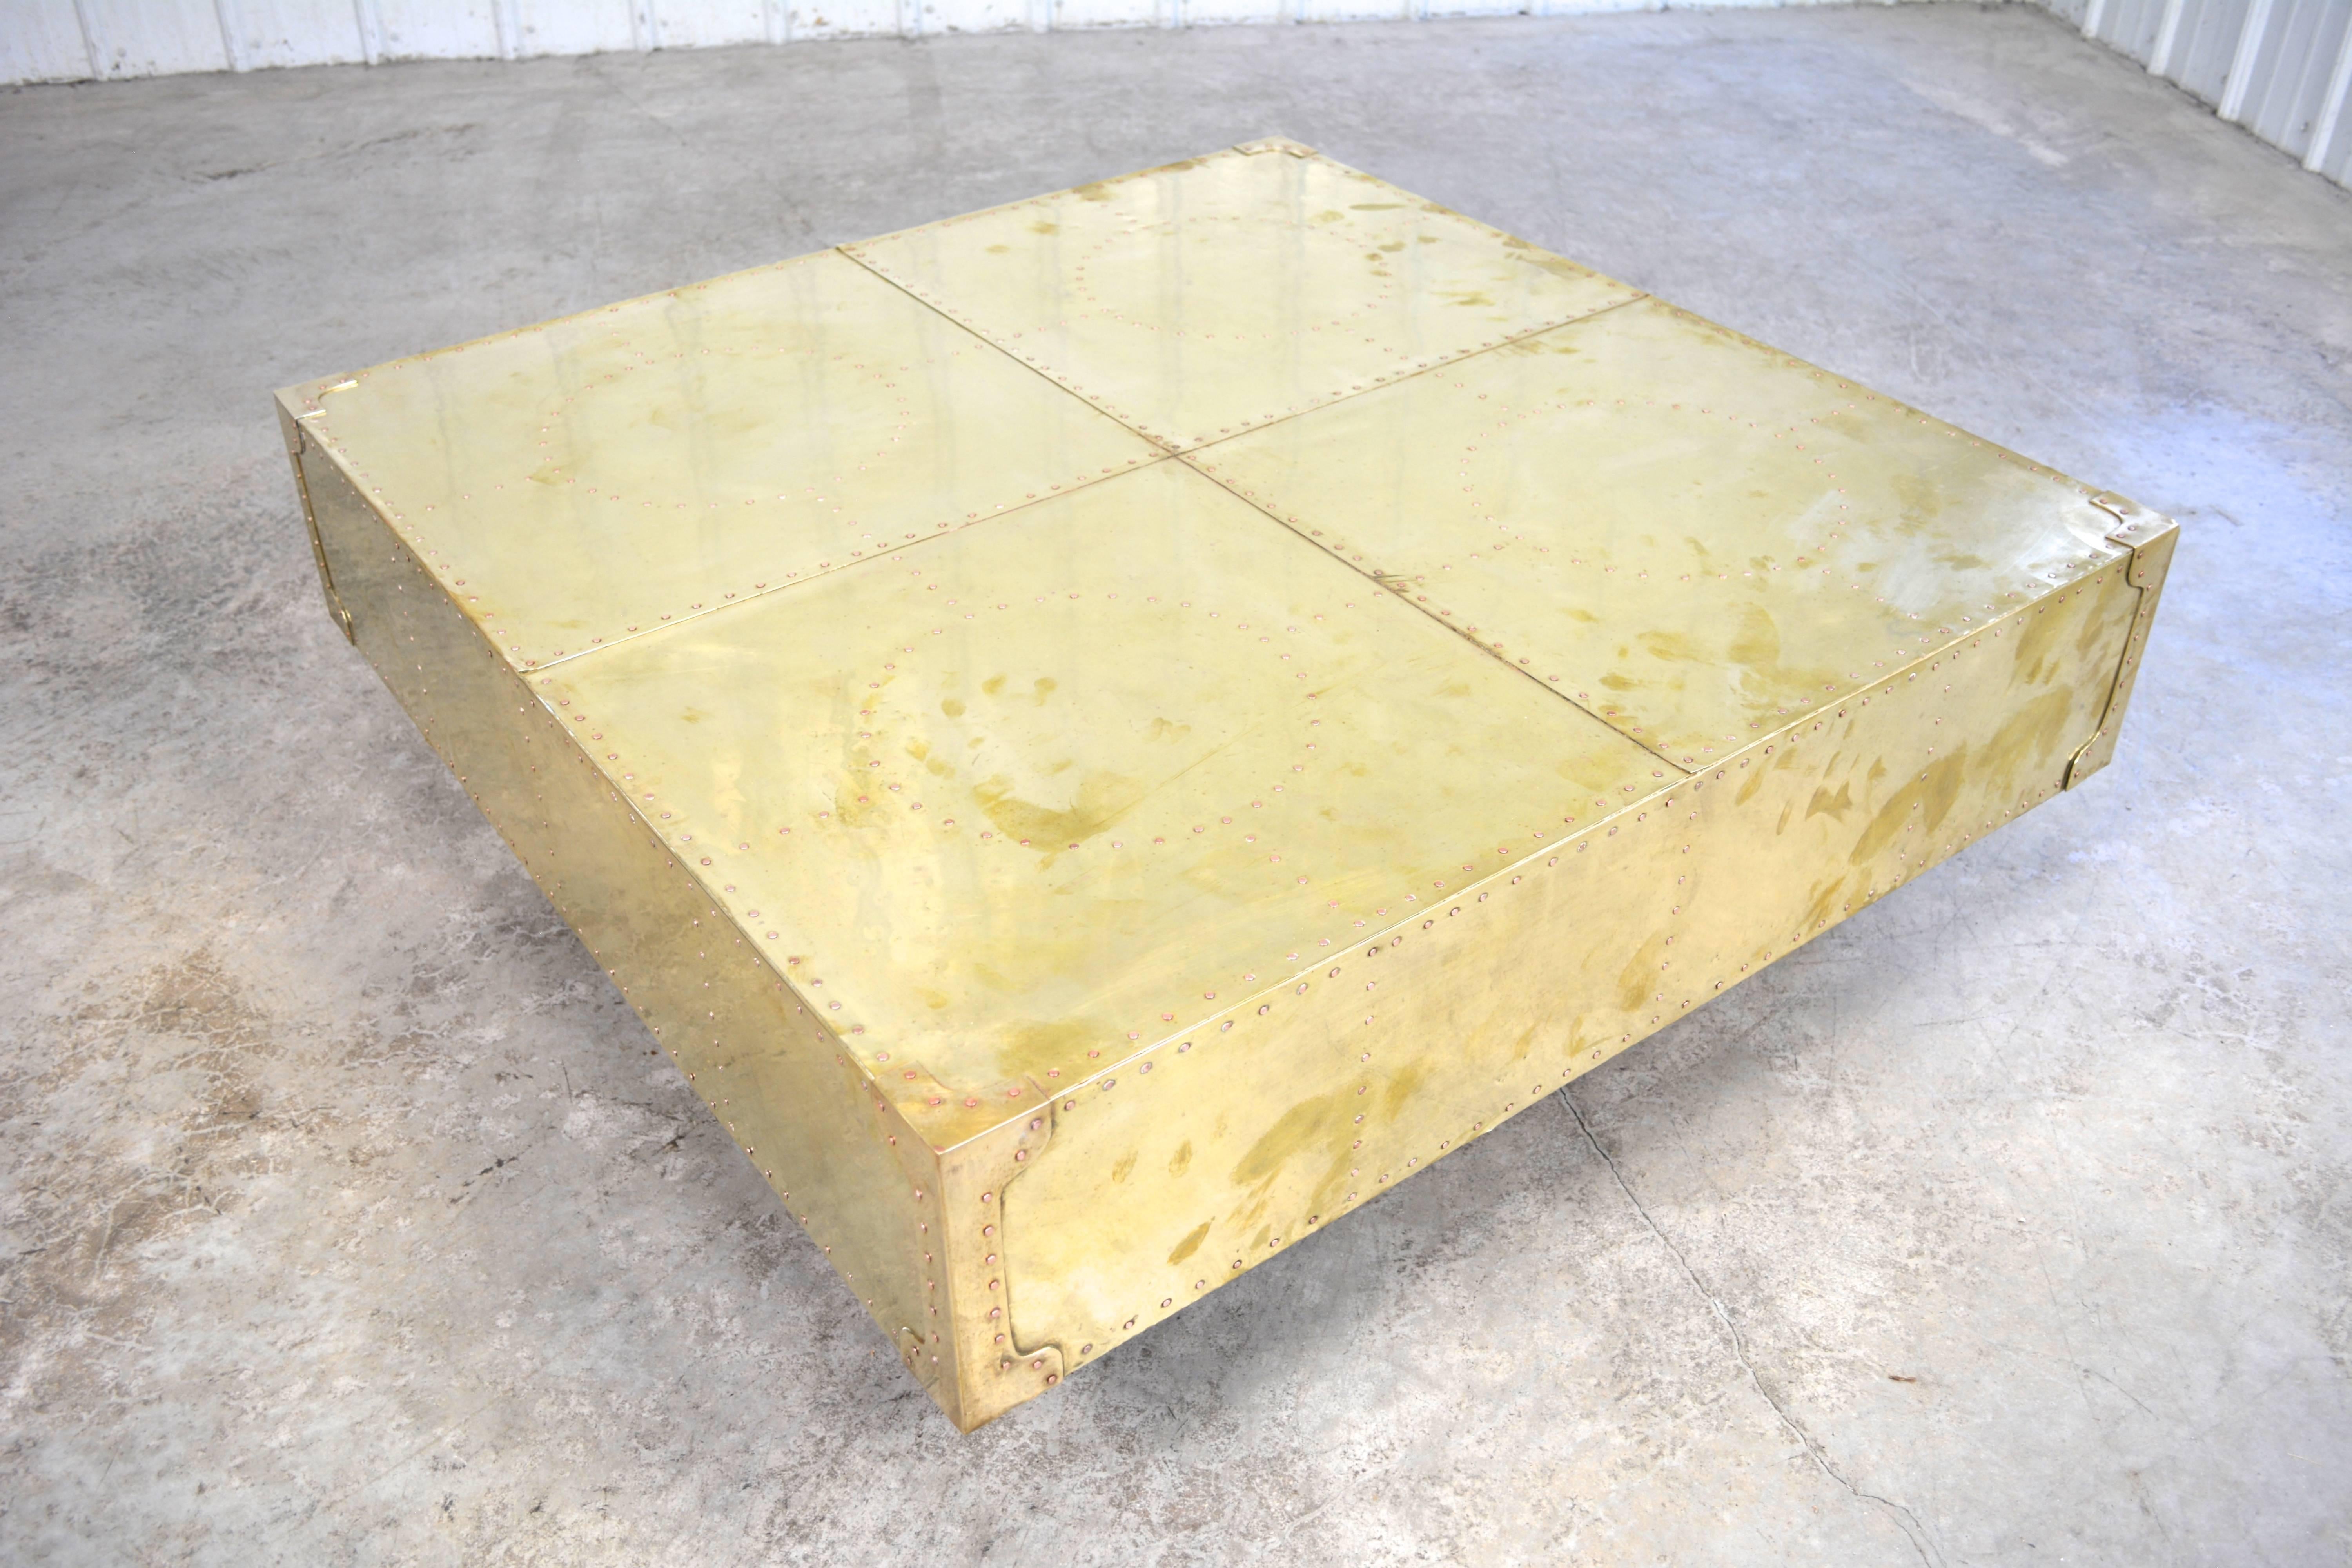 A gorgeous large-scale coffee table by Sarreid. Studded brass table sits on a walnut plinth base. Nicely aged patina present on the brass.